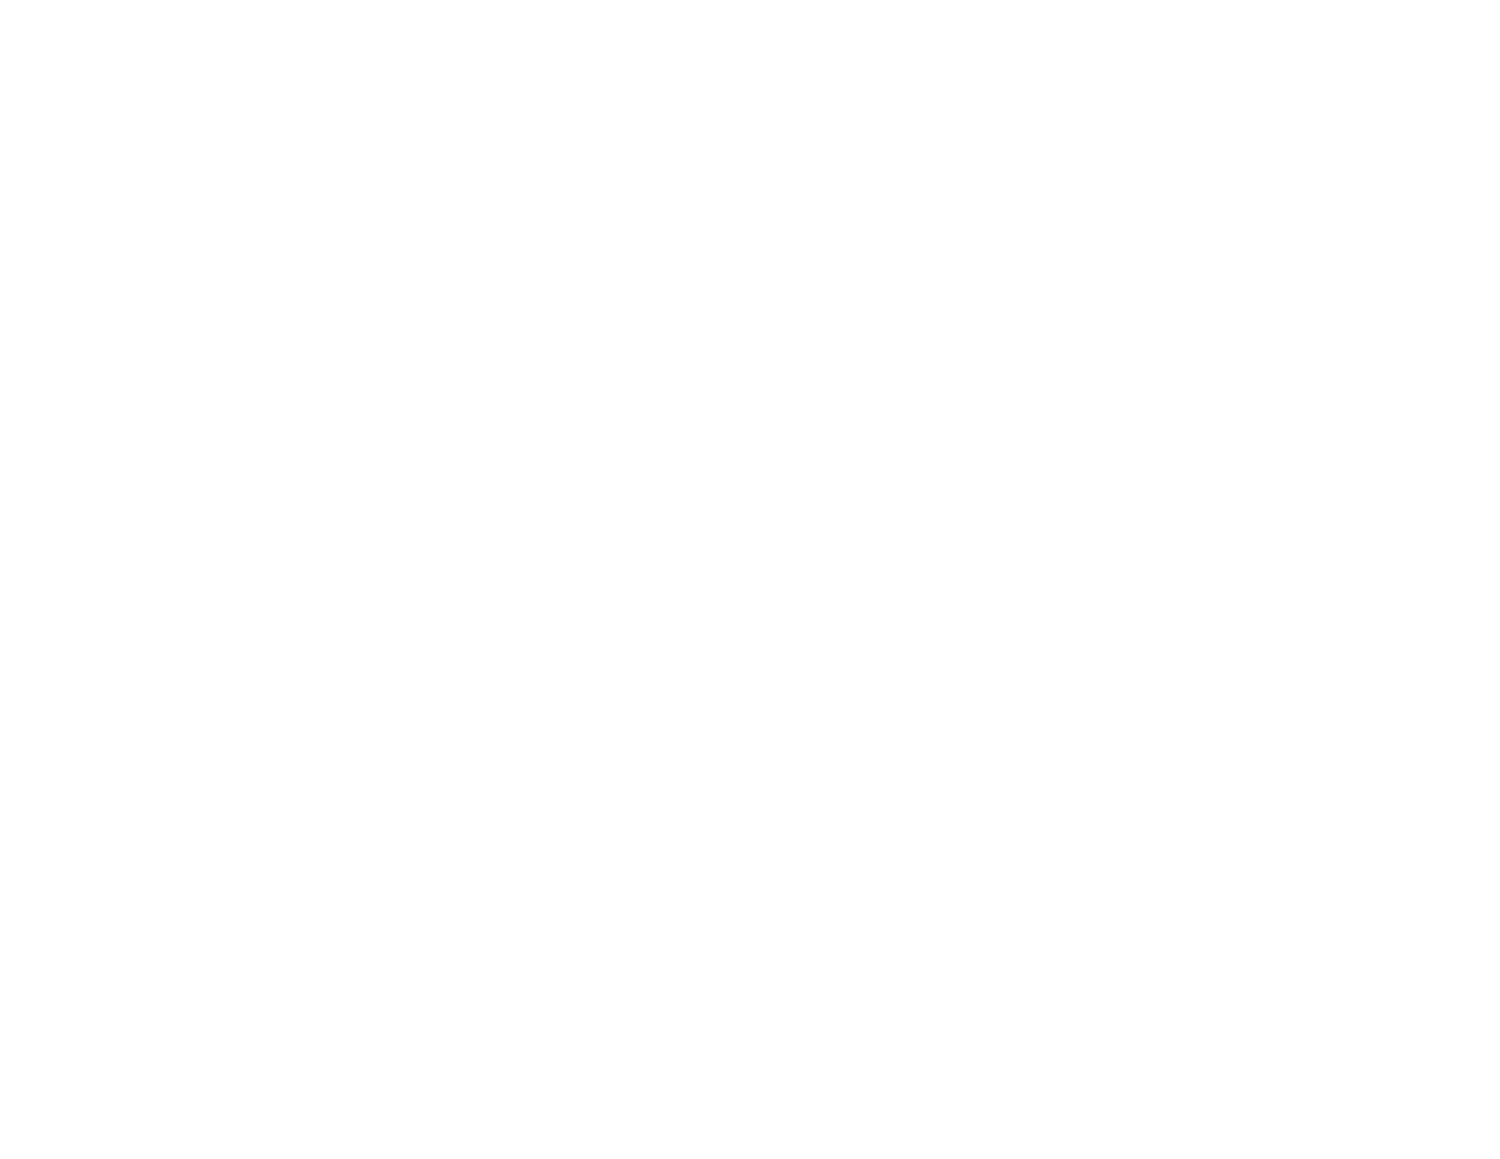 Highlands Year-End Review